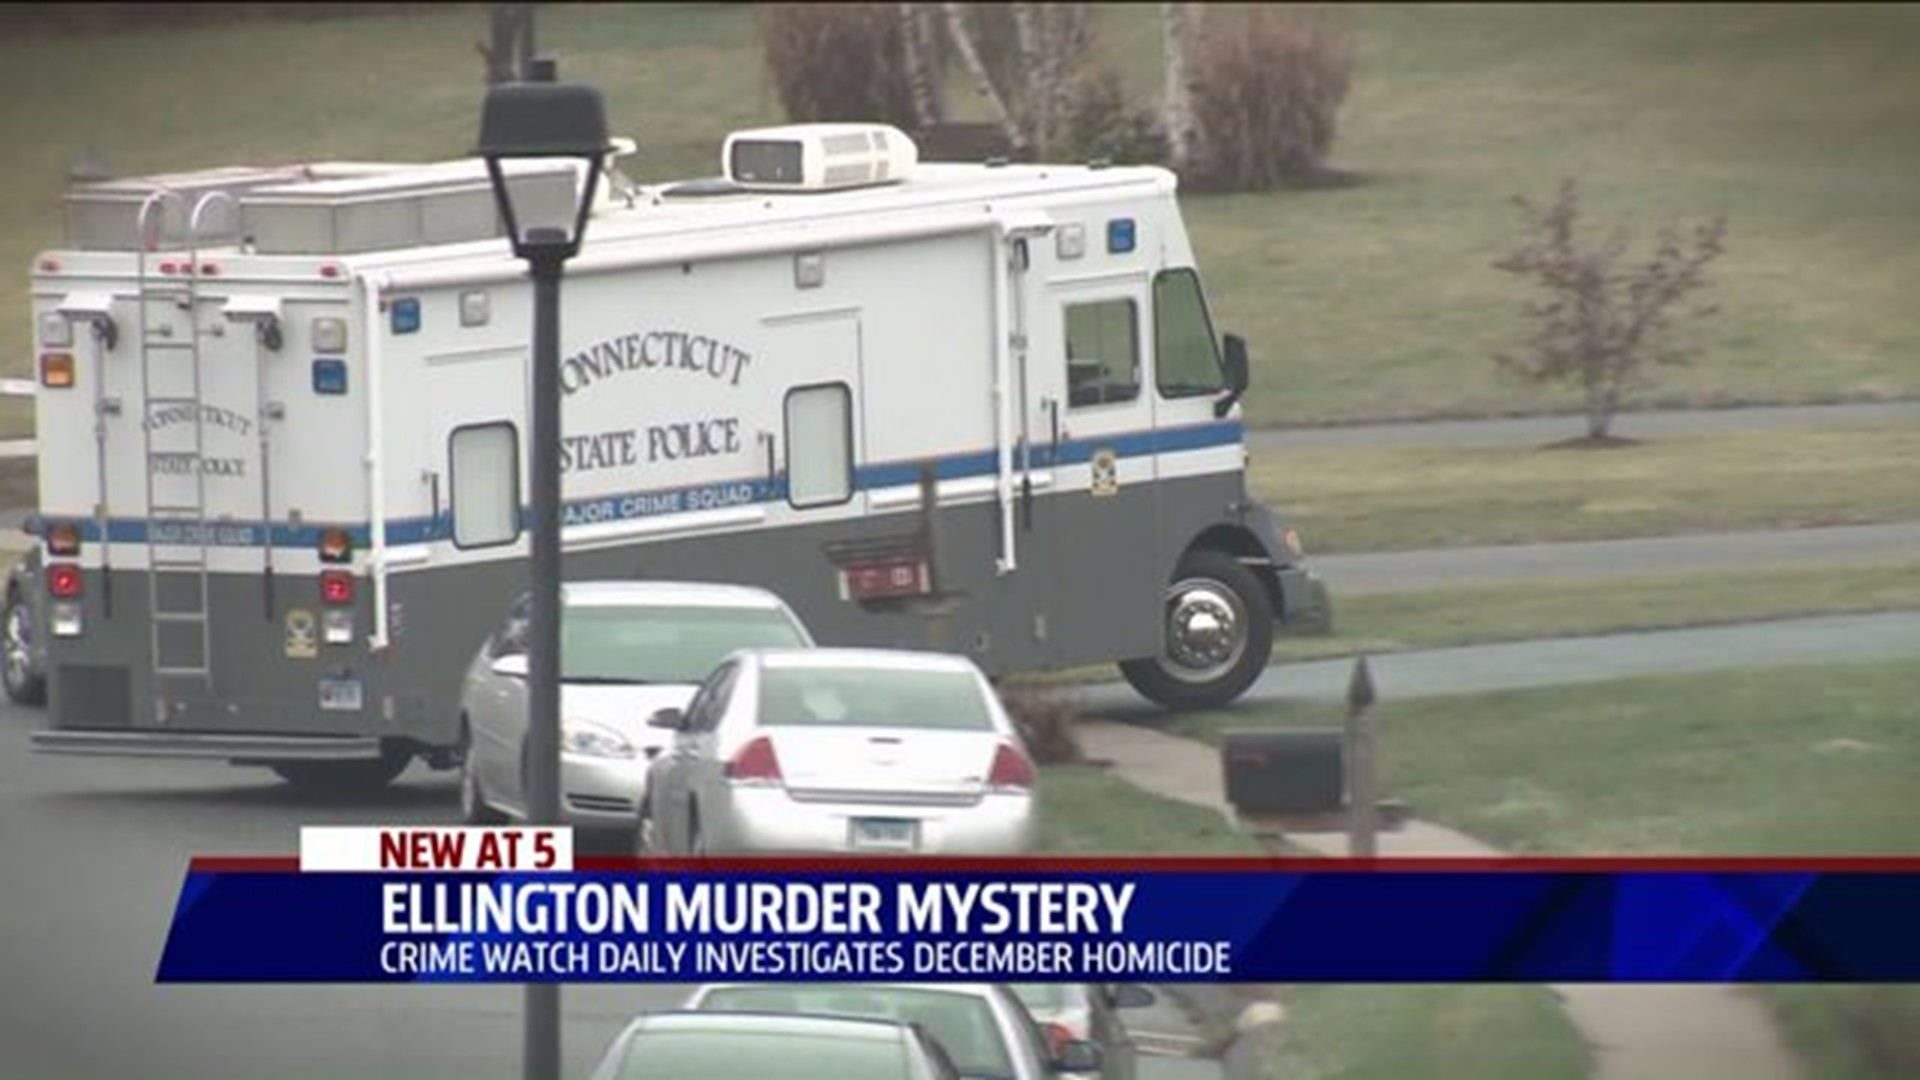 Murder mystery remains unsolved in Ellington